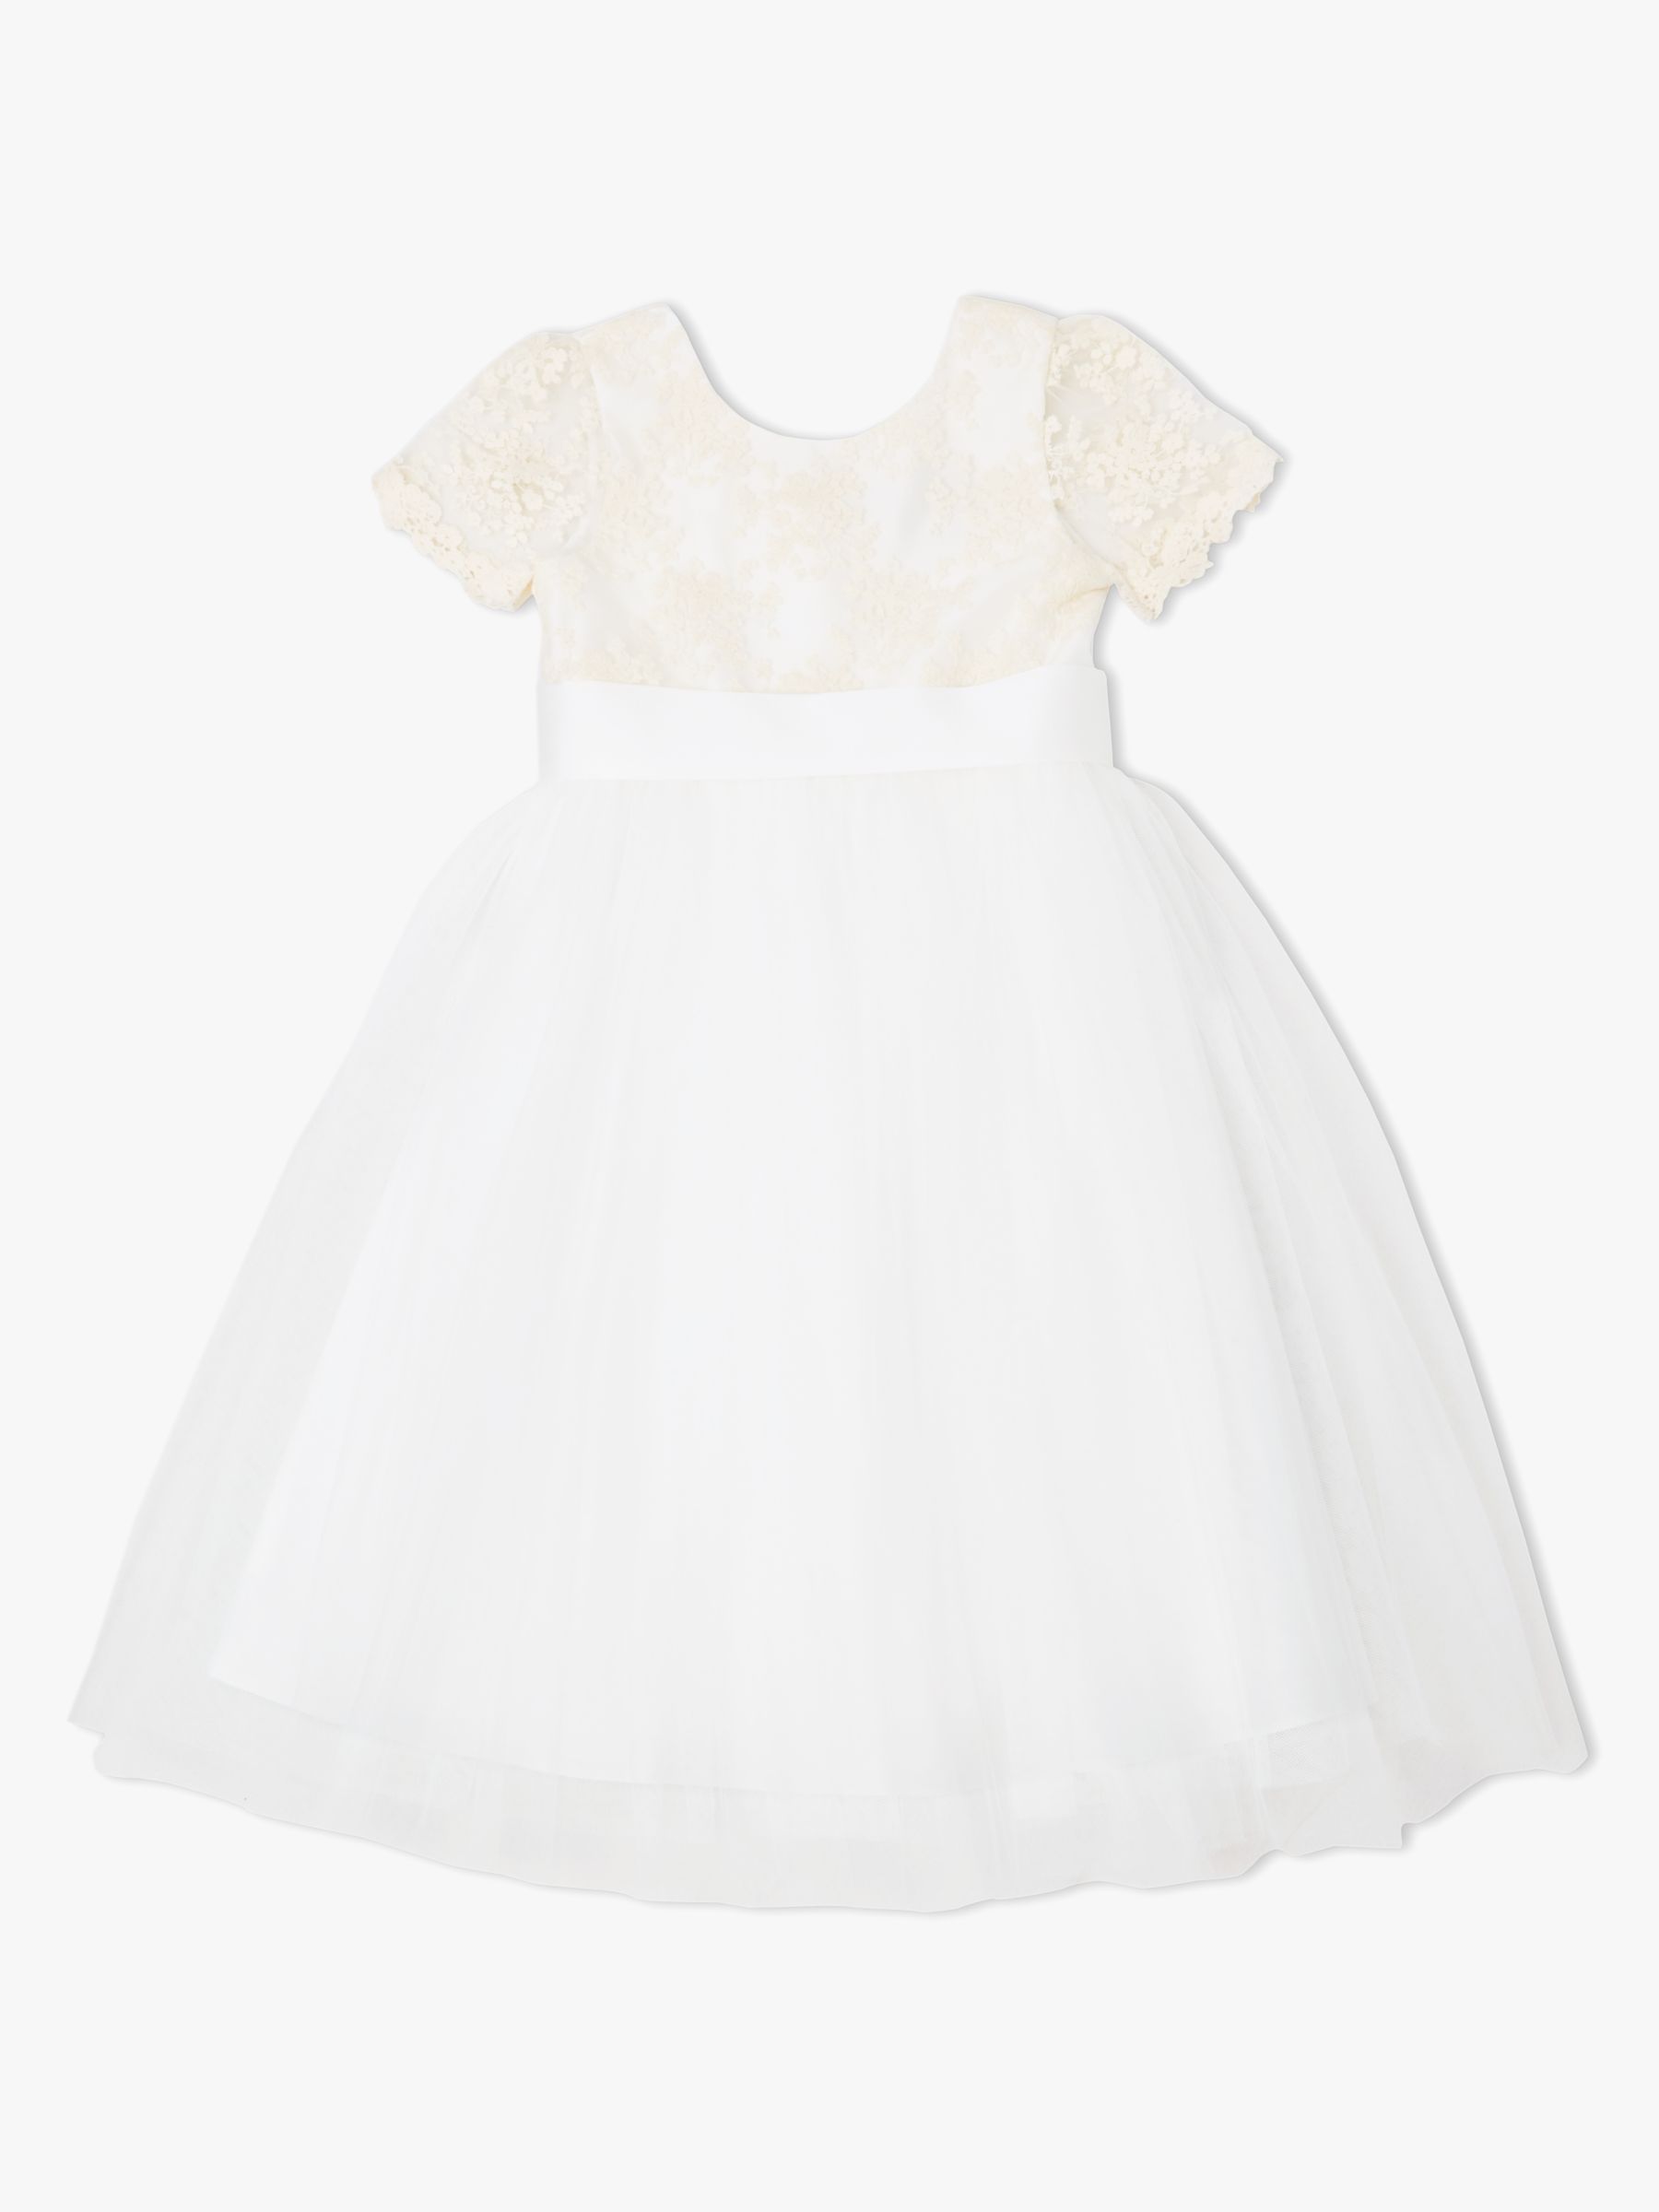 John Lewis Heirloom Collection Kids' Short Sleeve Lace Dress, Ivory, 2 years